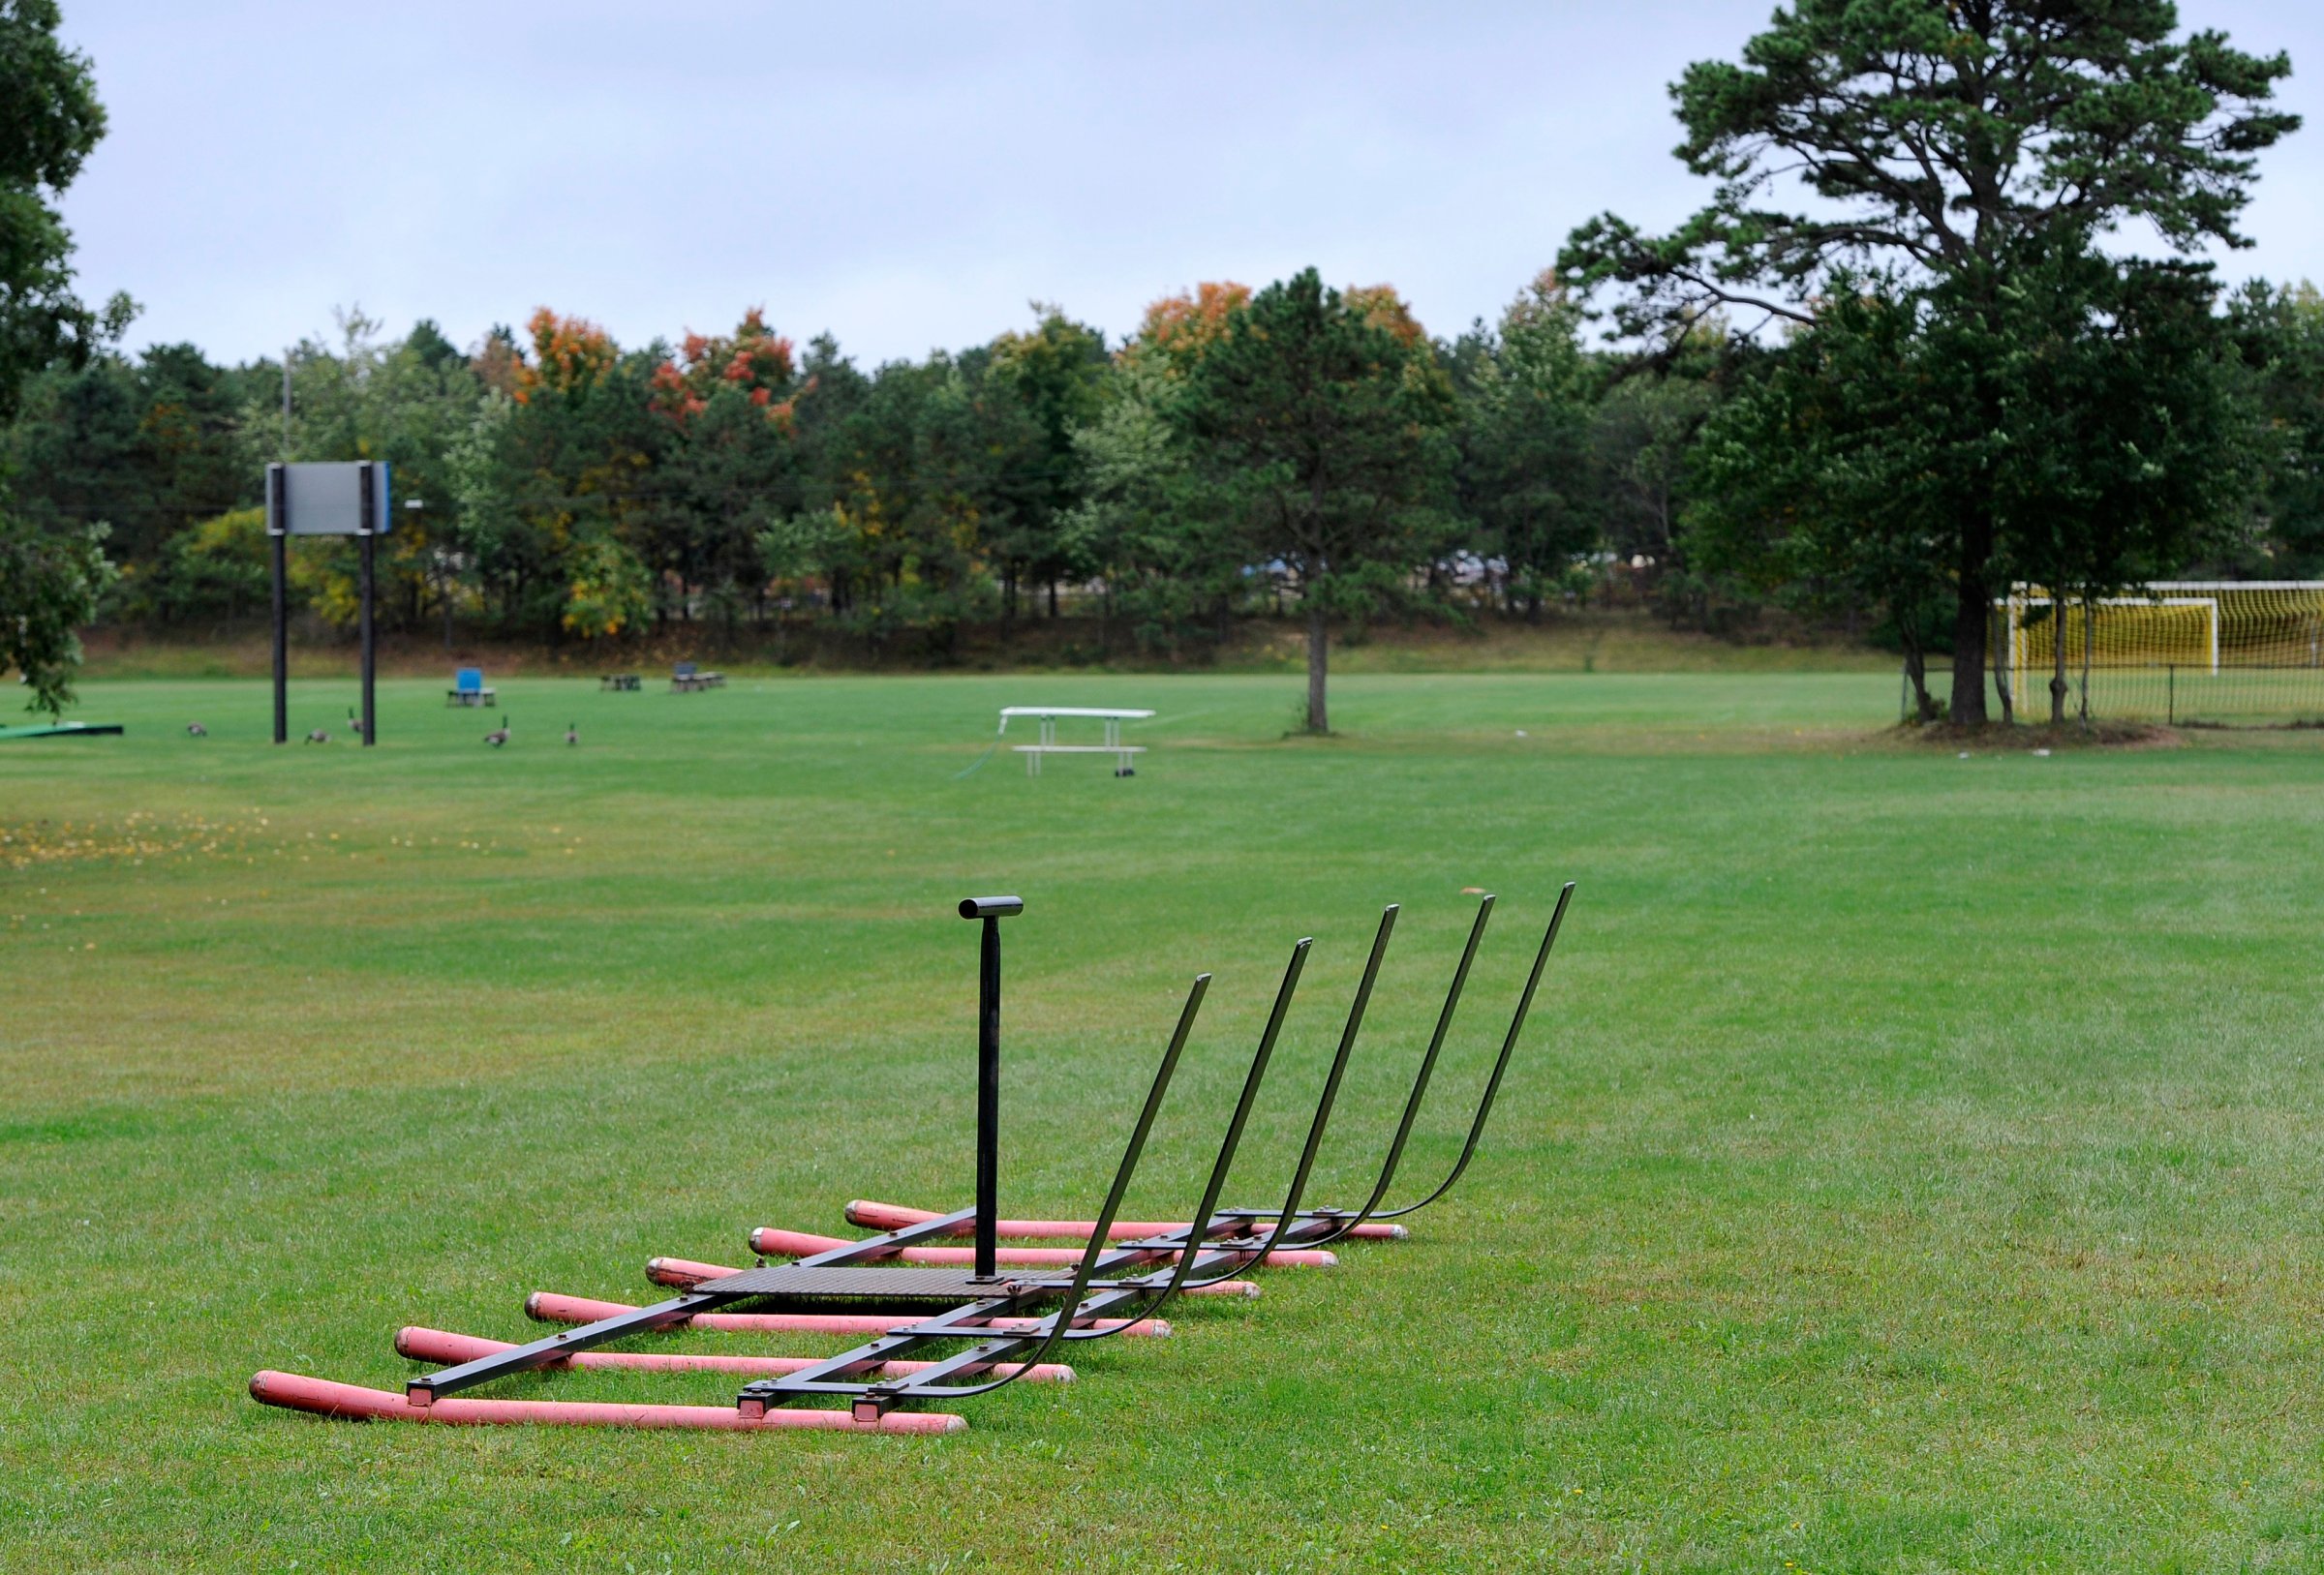 Equipment sits on a football practice field near the main entrance for Shoreham-Wading River High School on Oct. 2, 2014, in Shoreham, N.Y.